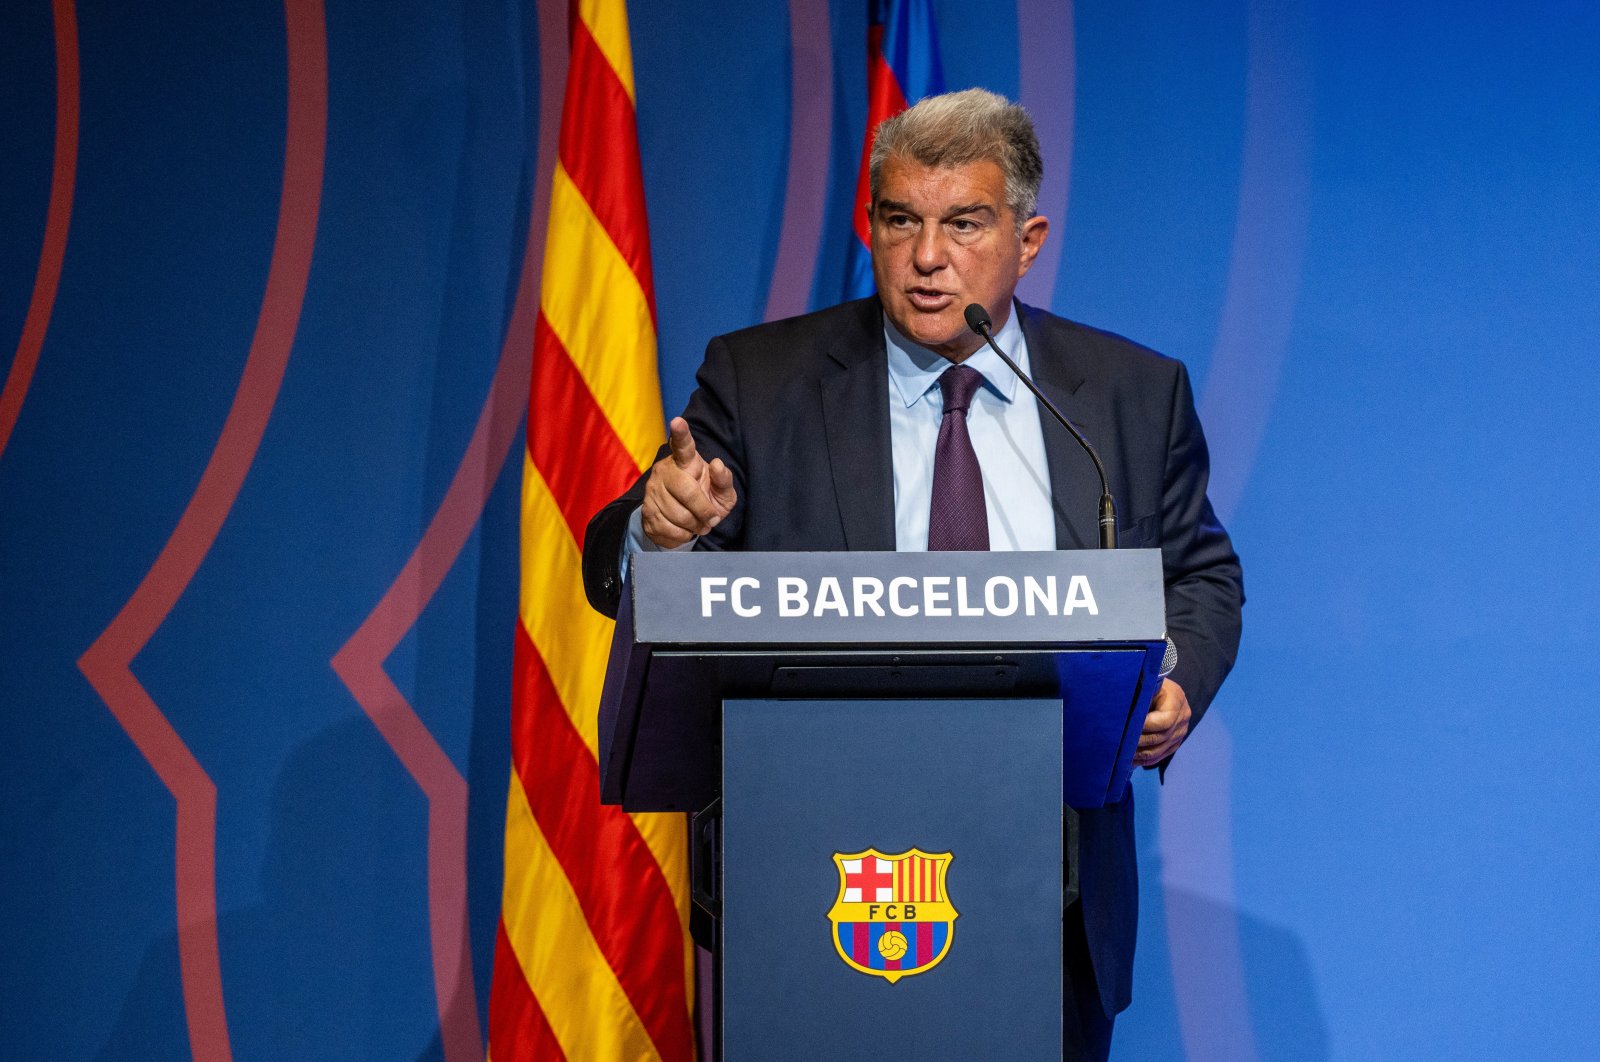 Joan Laporta, President of FC Barcelona, attends a press conference about Negreira Case at Spotify Camp Nou stadium, Barcelona, Spain, April 17, 2023. (Getty Images Photo)